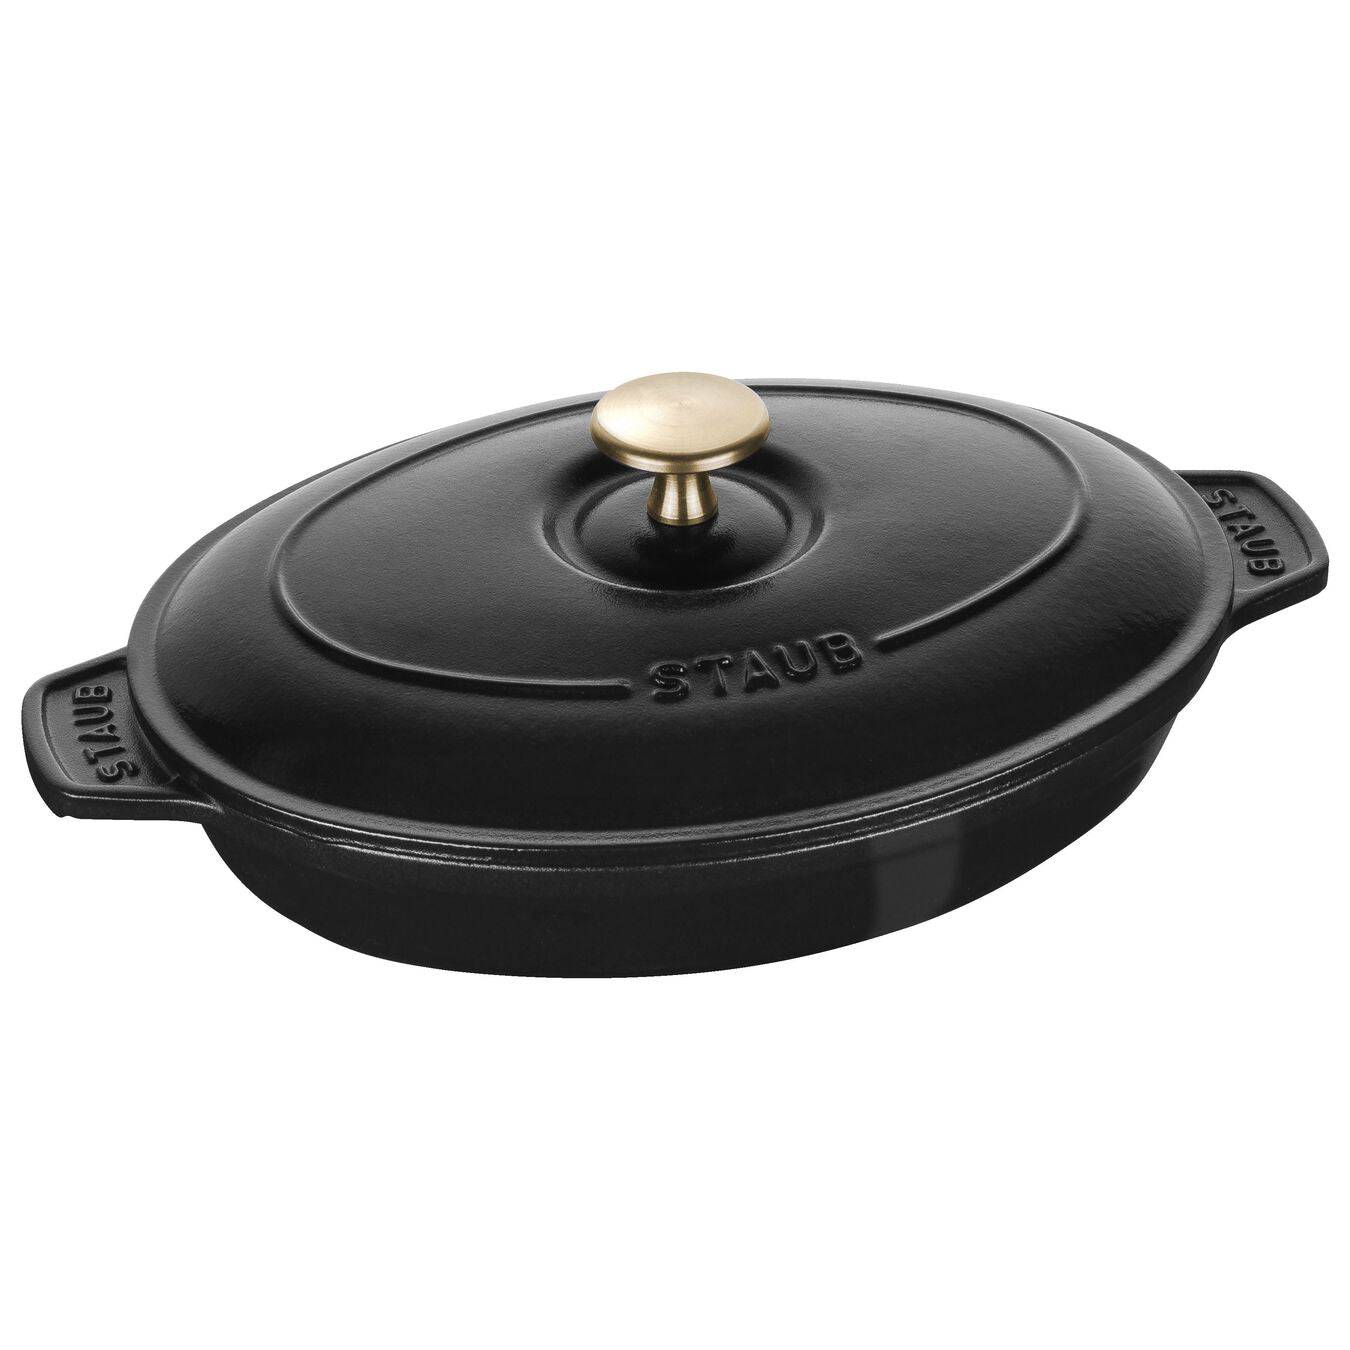 Staub Cast Iron Oval Dish Covered Baking, 9-in x 6.6-in, Matte Black - Kitchen Universe